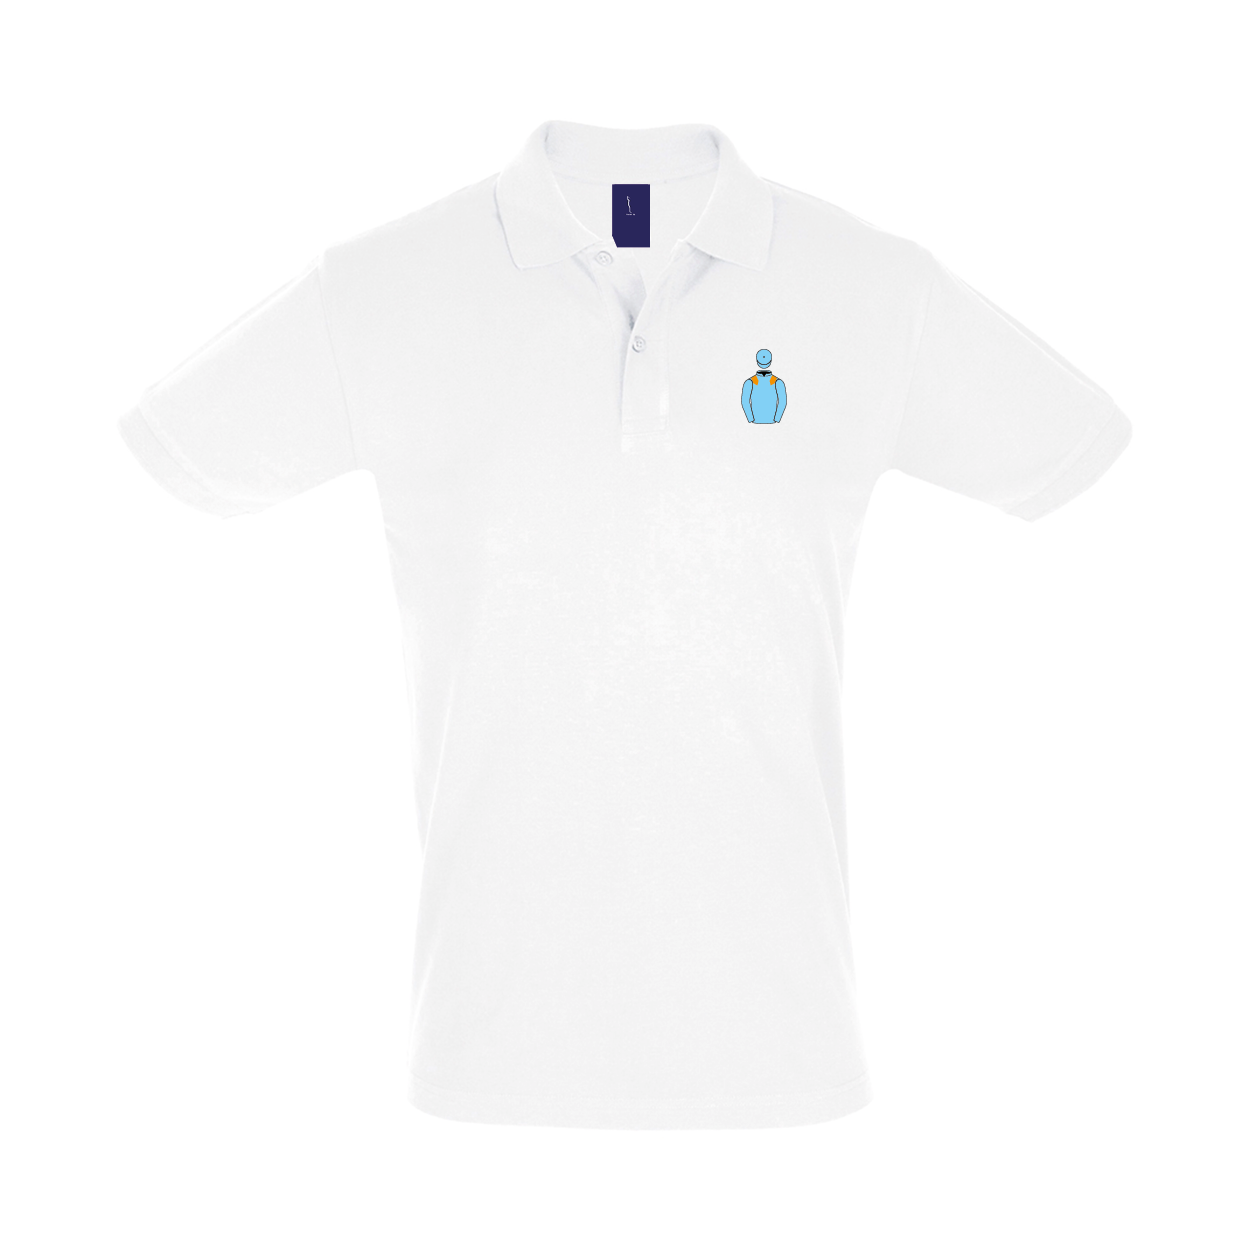 Ladies Middleham Park Racing Embroidered Polo Shirt - Clothing - Hacked Up